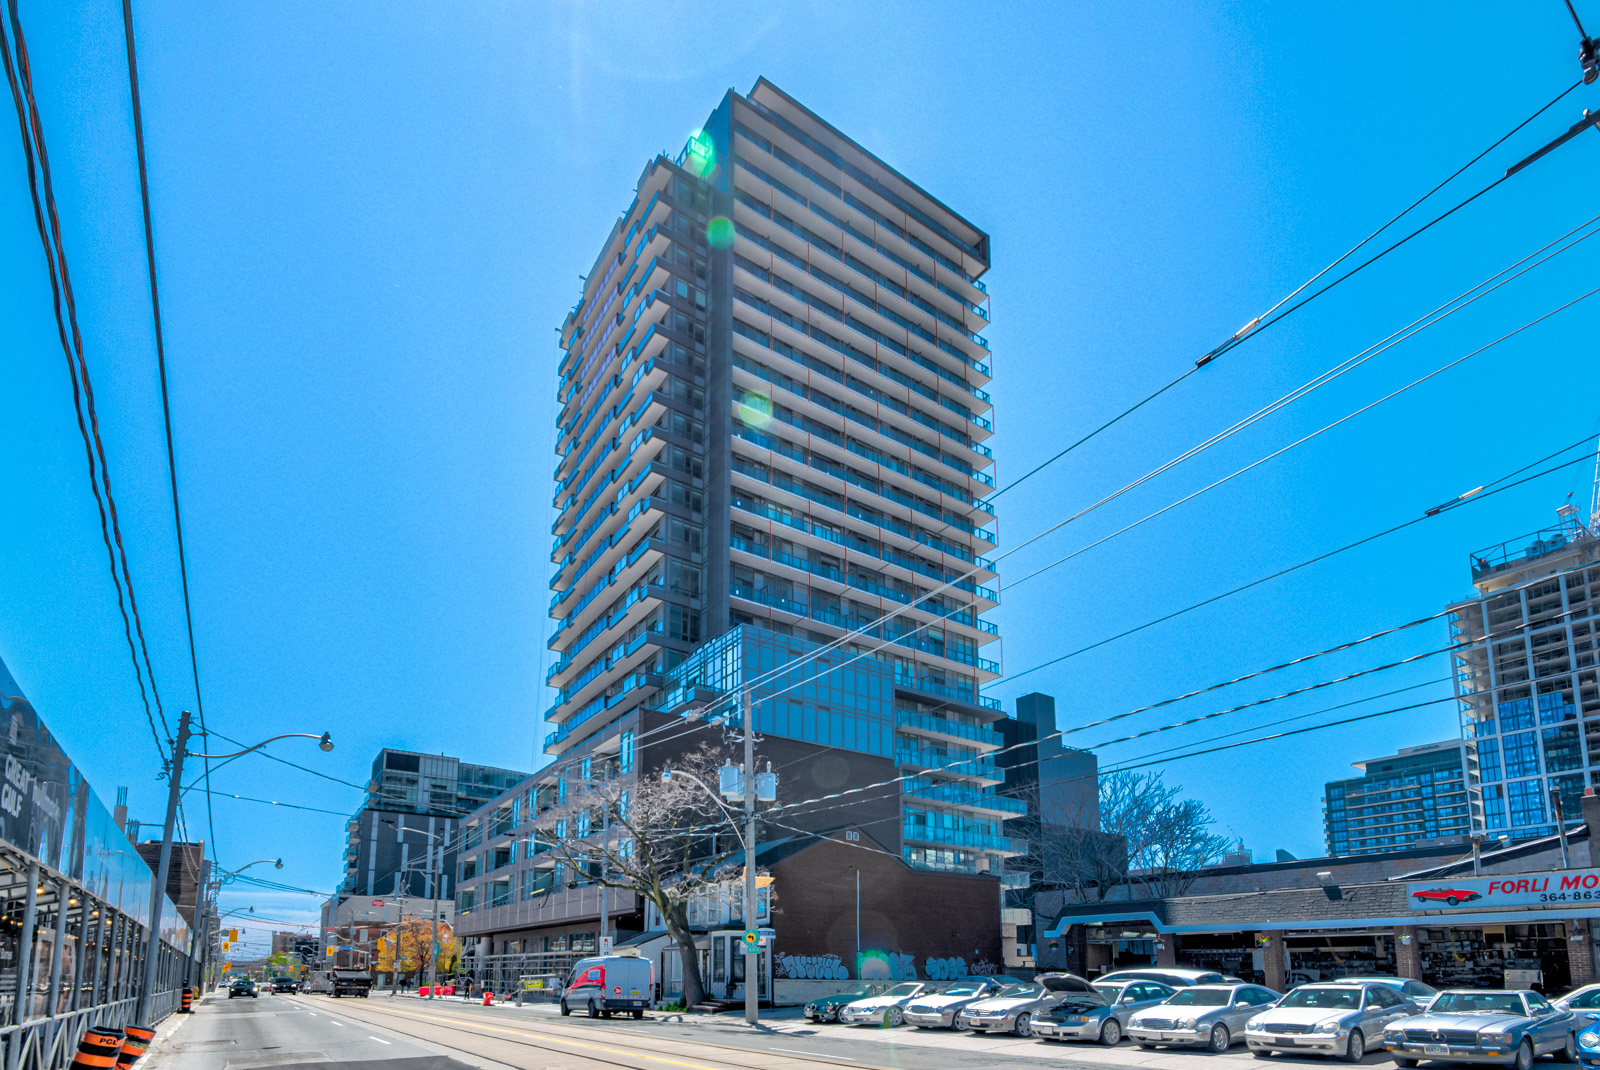 Across-the-street view of East United Condos, a mid-rise condo.